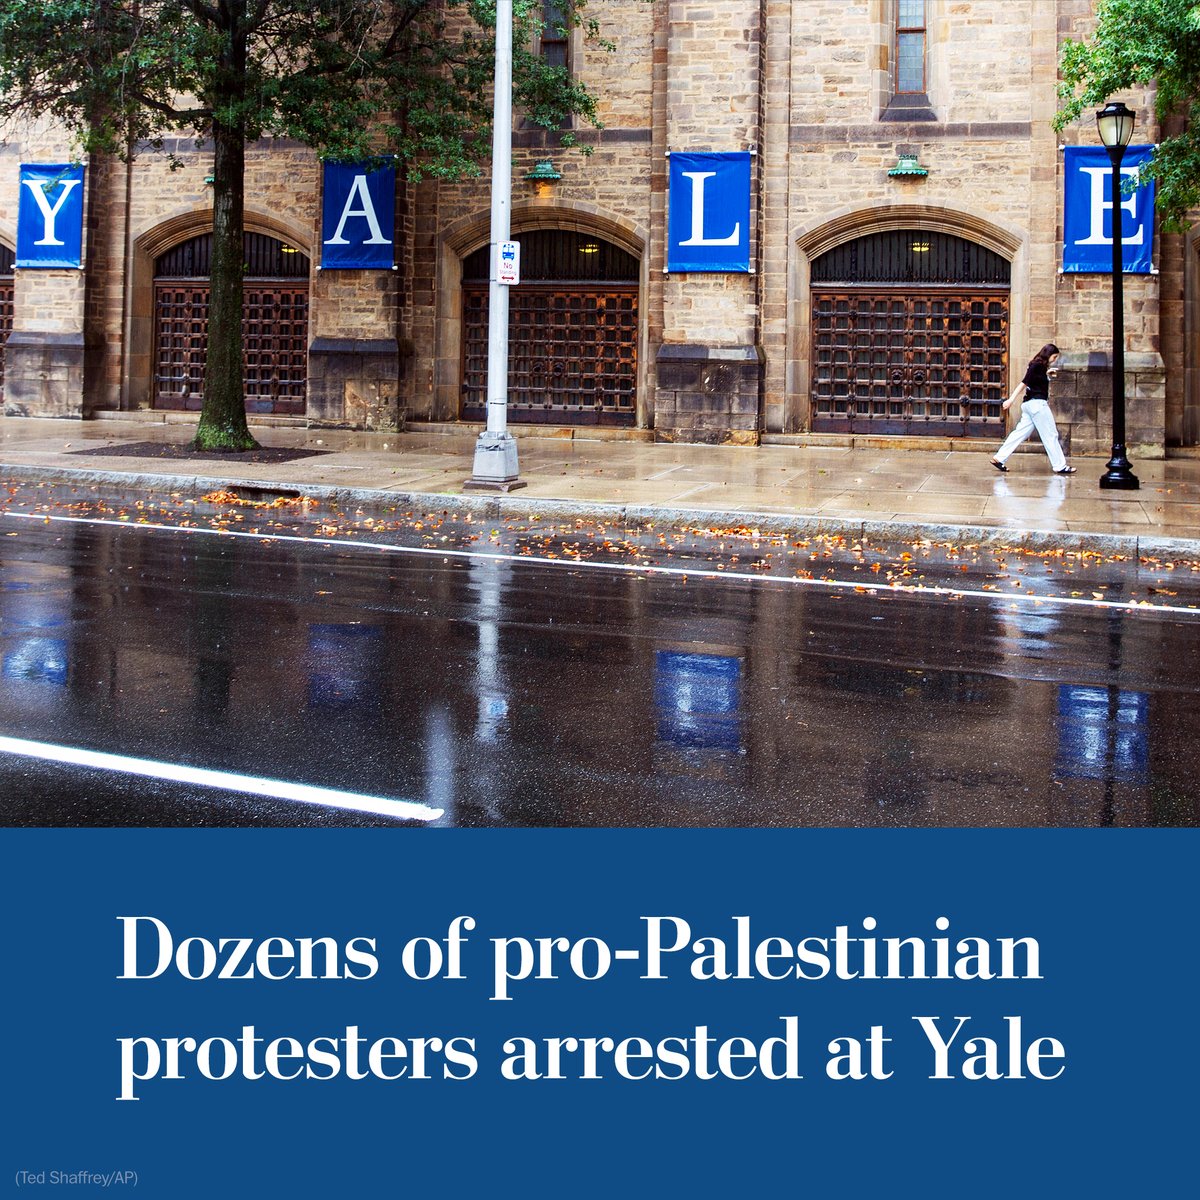 Yale is “sending bombs to level every school in Gaza, and I’m not willing to stand silent while that happens,” said Tacey Hutten, a student protester who was arrested Monday. “And based on what I’ve seen the last couple of days, this campus isn’t either.” wapo.st/3xQUCsH